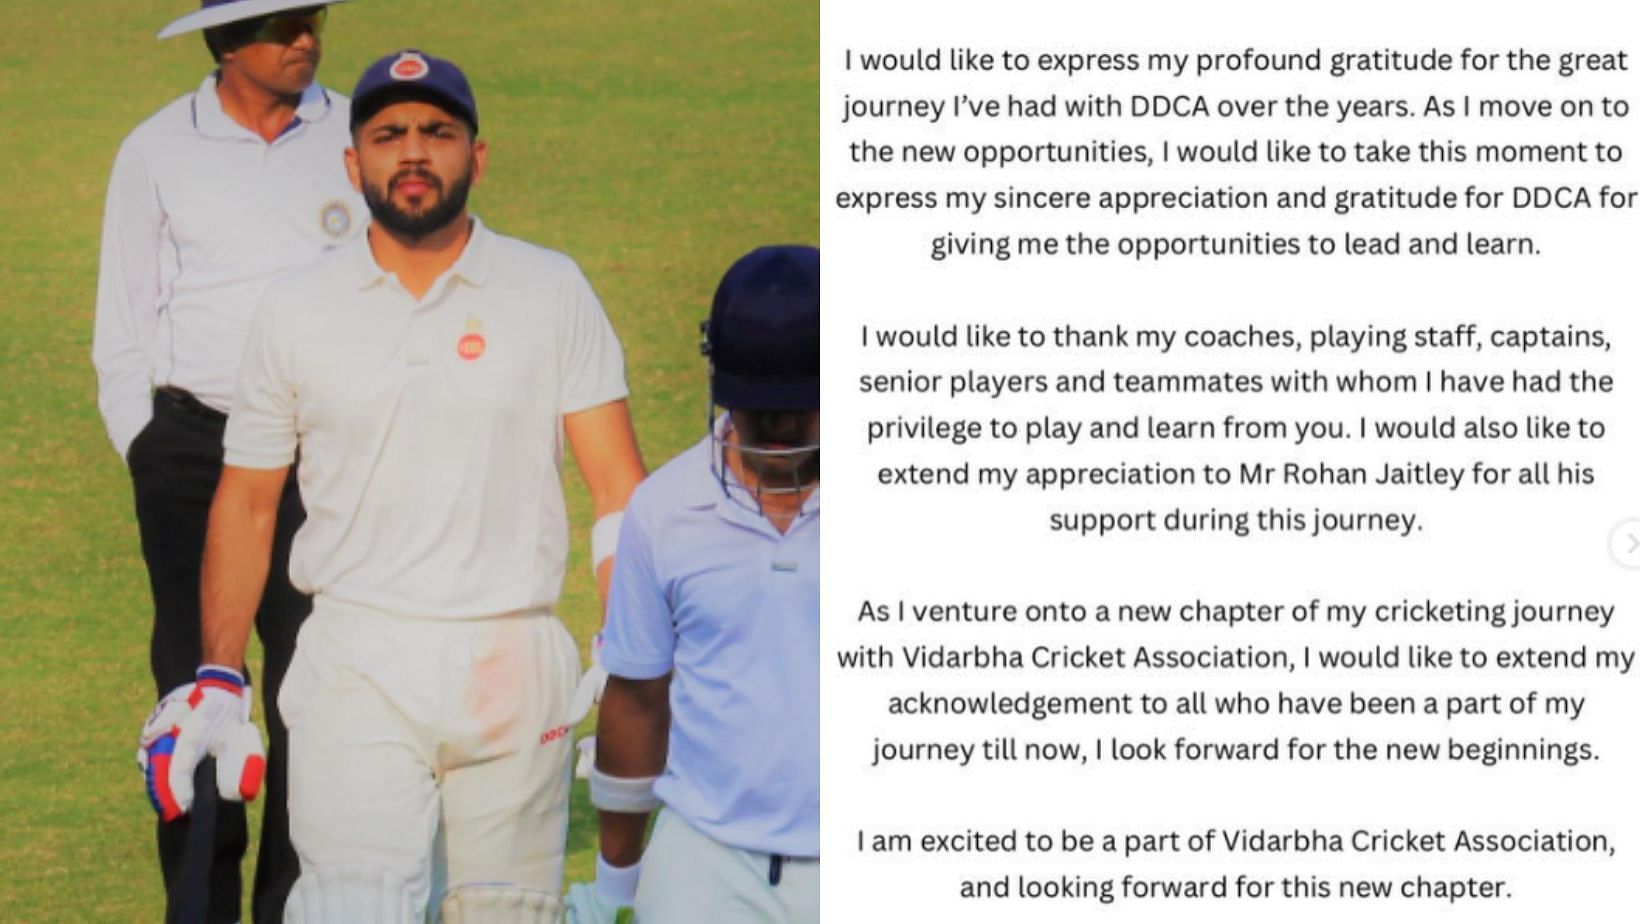 Dhruv Shorey writes a parting message to DDCA.